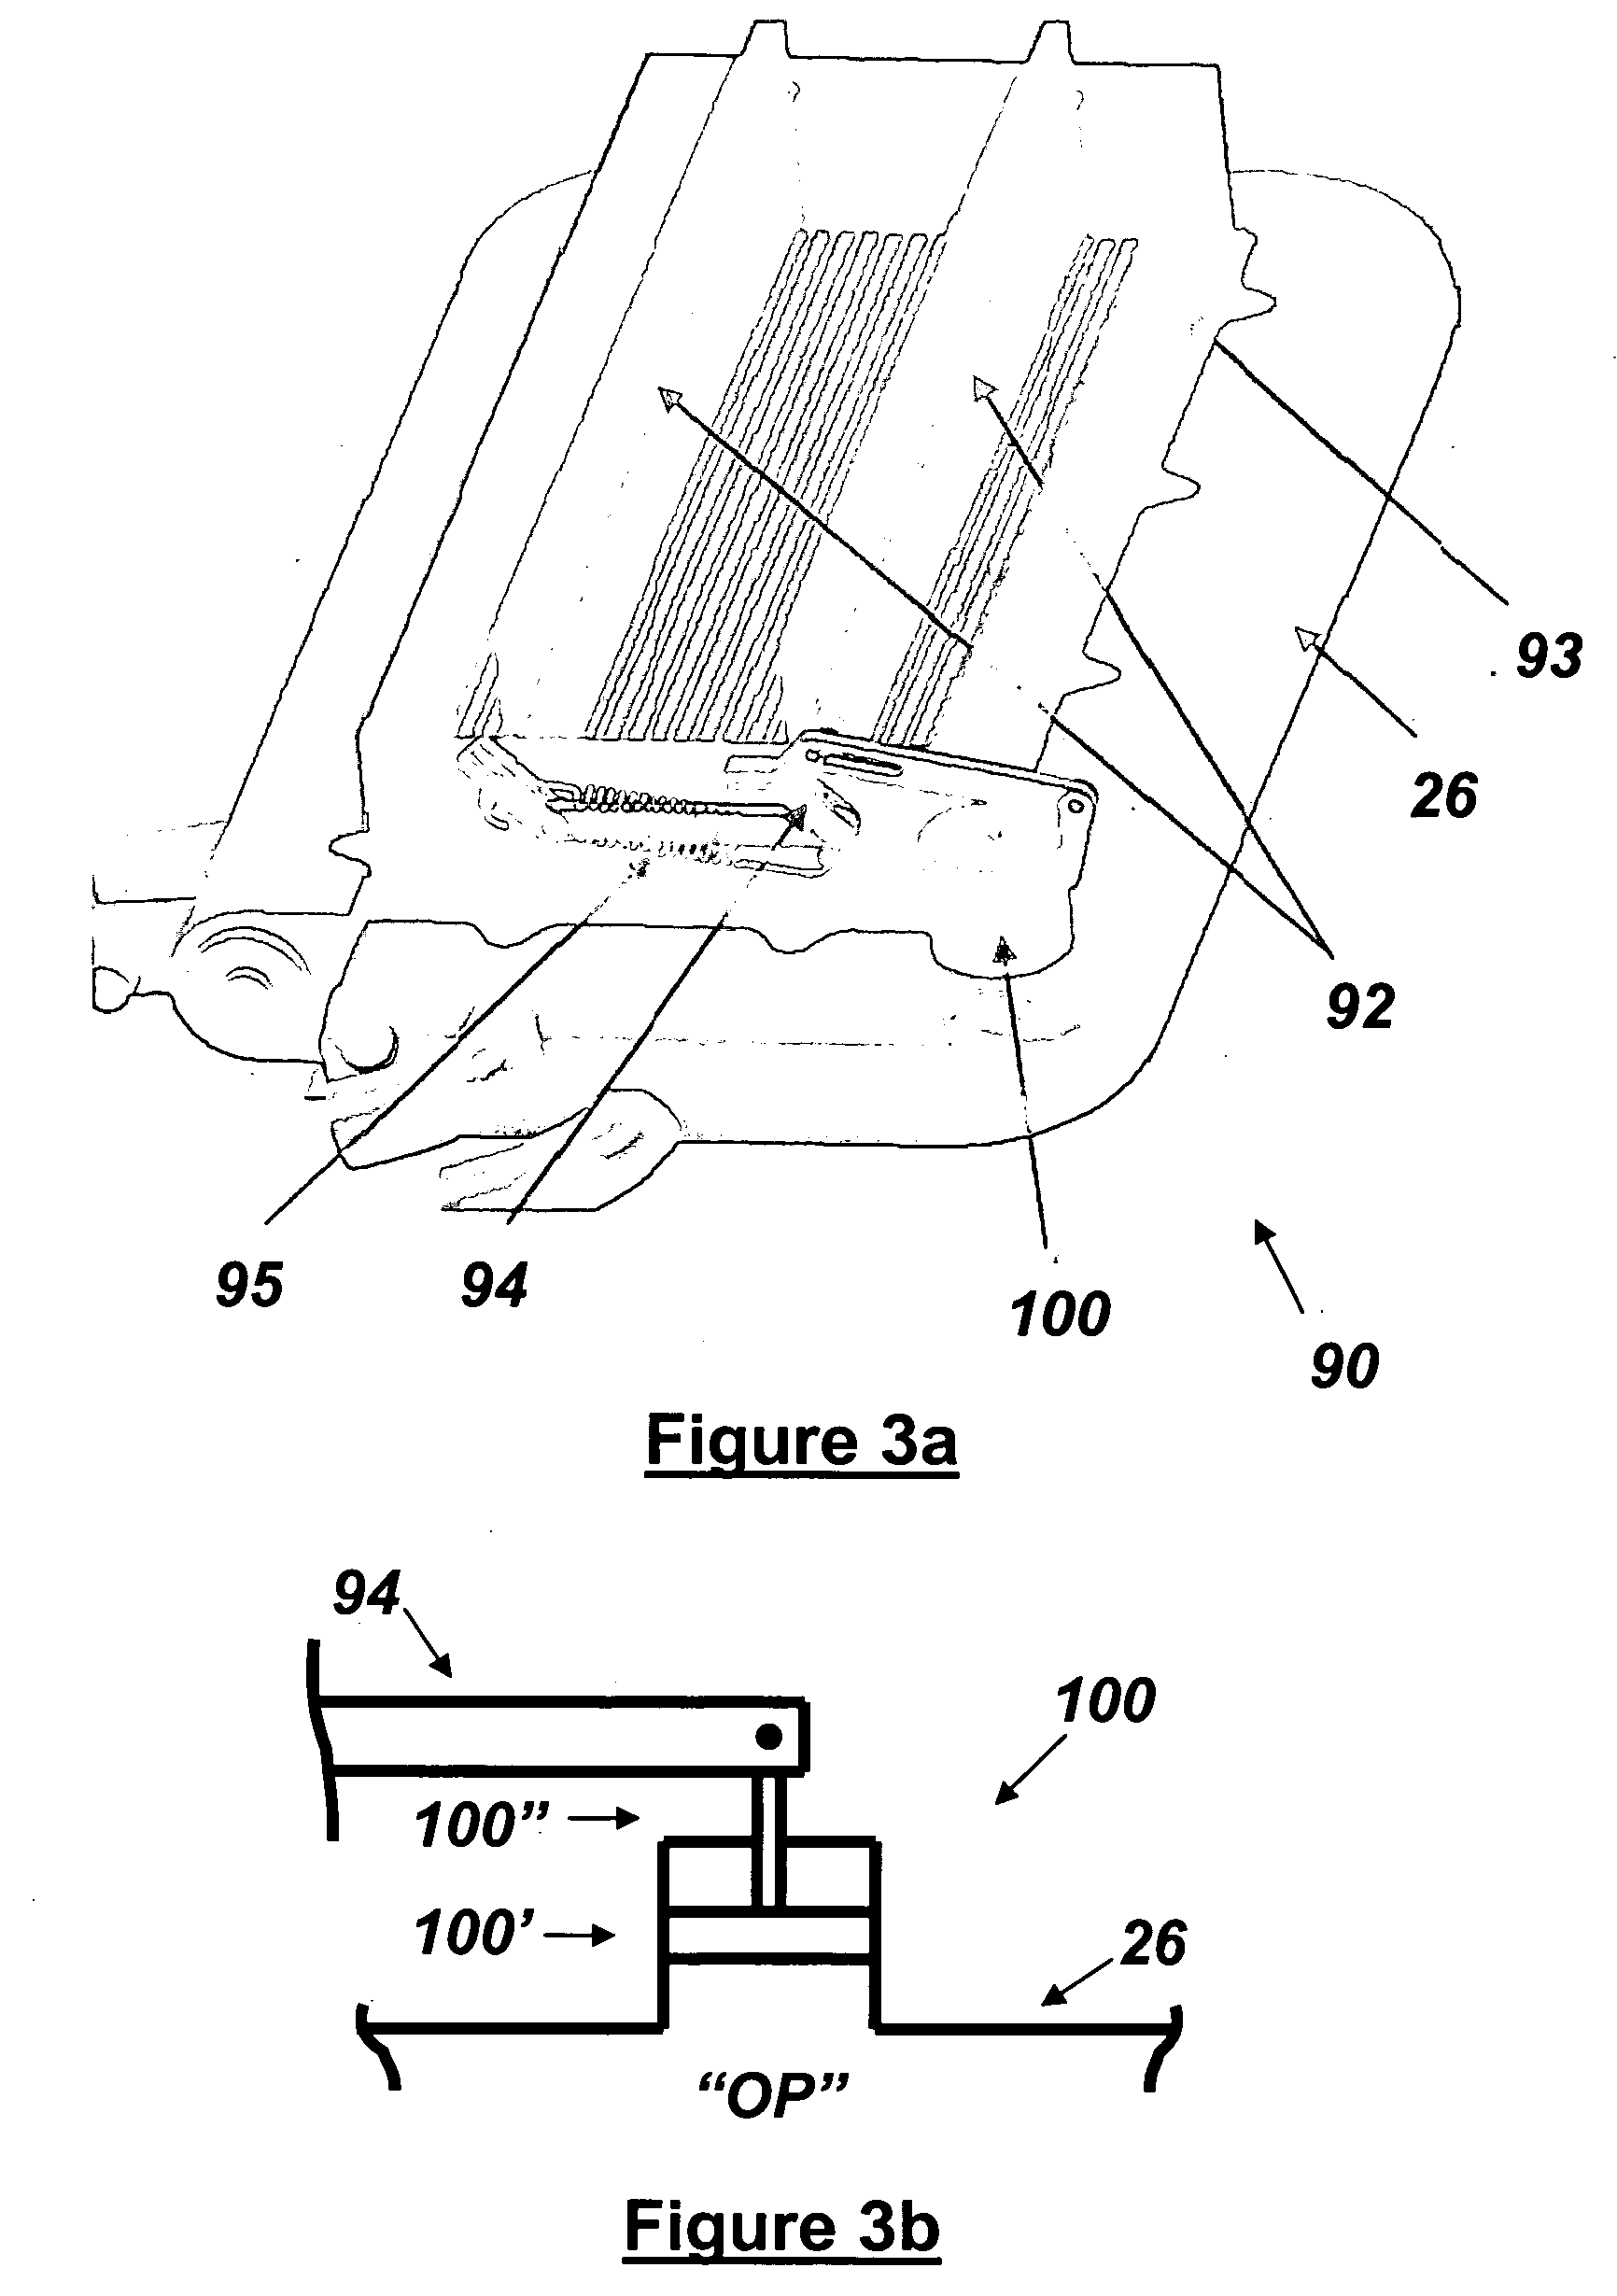 Fire shield apparatus and method